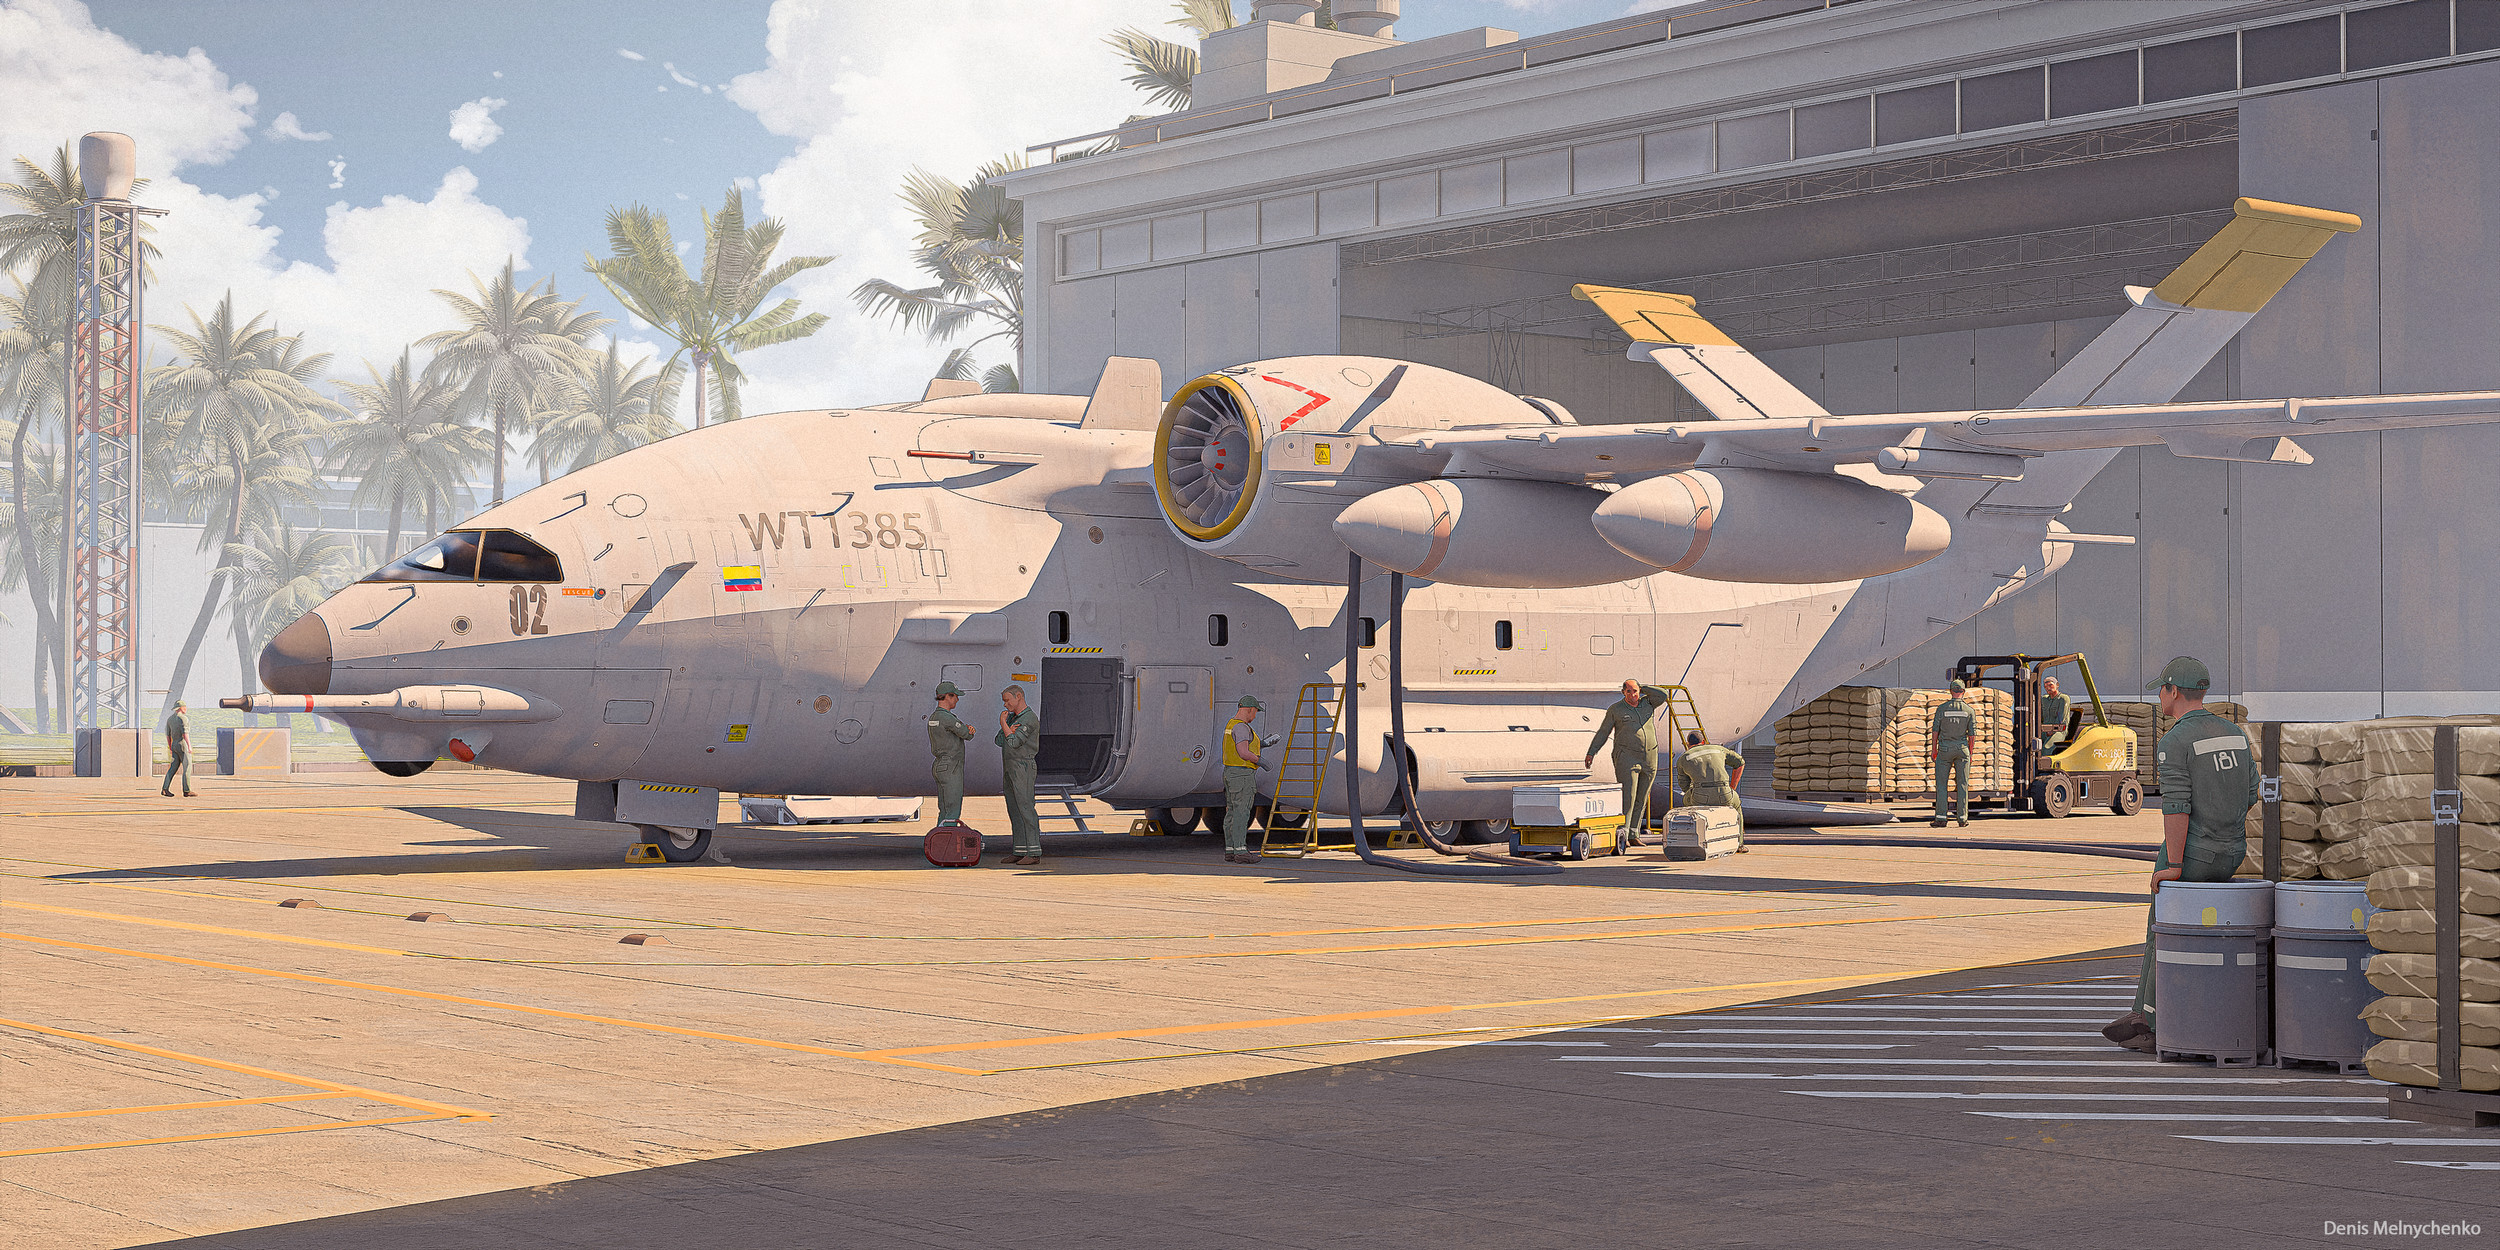 Futuristic airplane docked at a terminal with cargo being loaded, set against a clear sky, perfect for an HD aviation-themed desktop wallpaper.